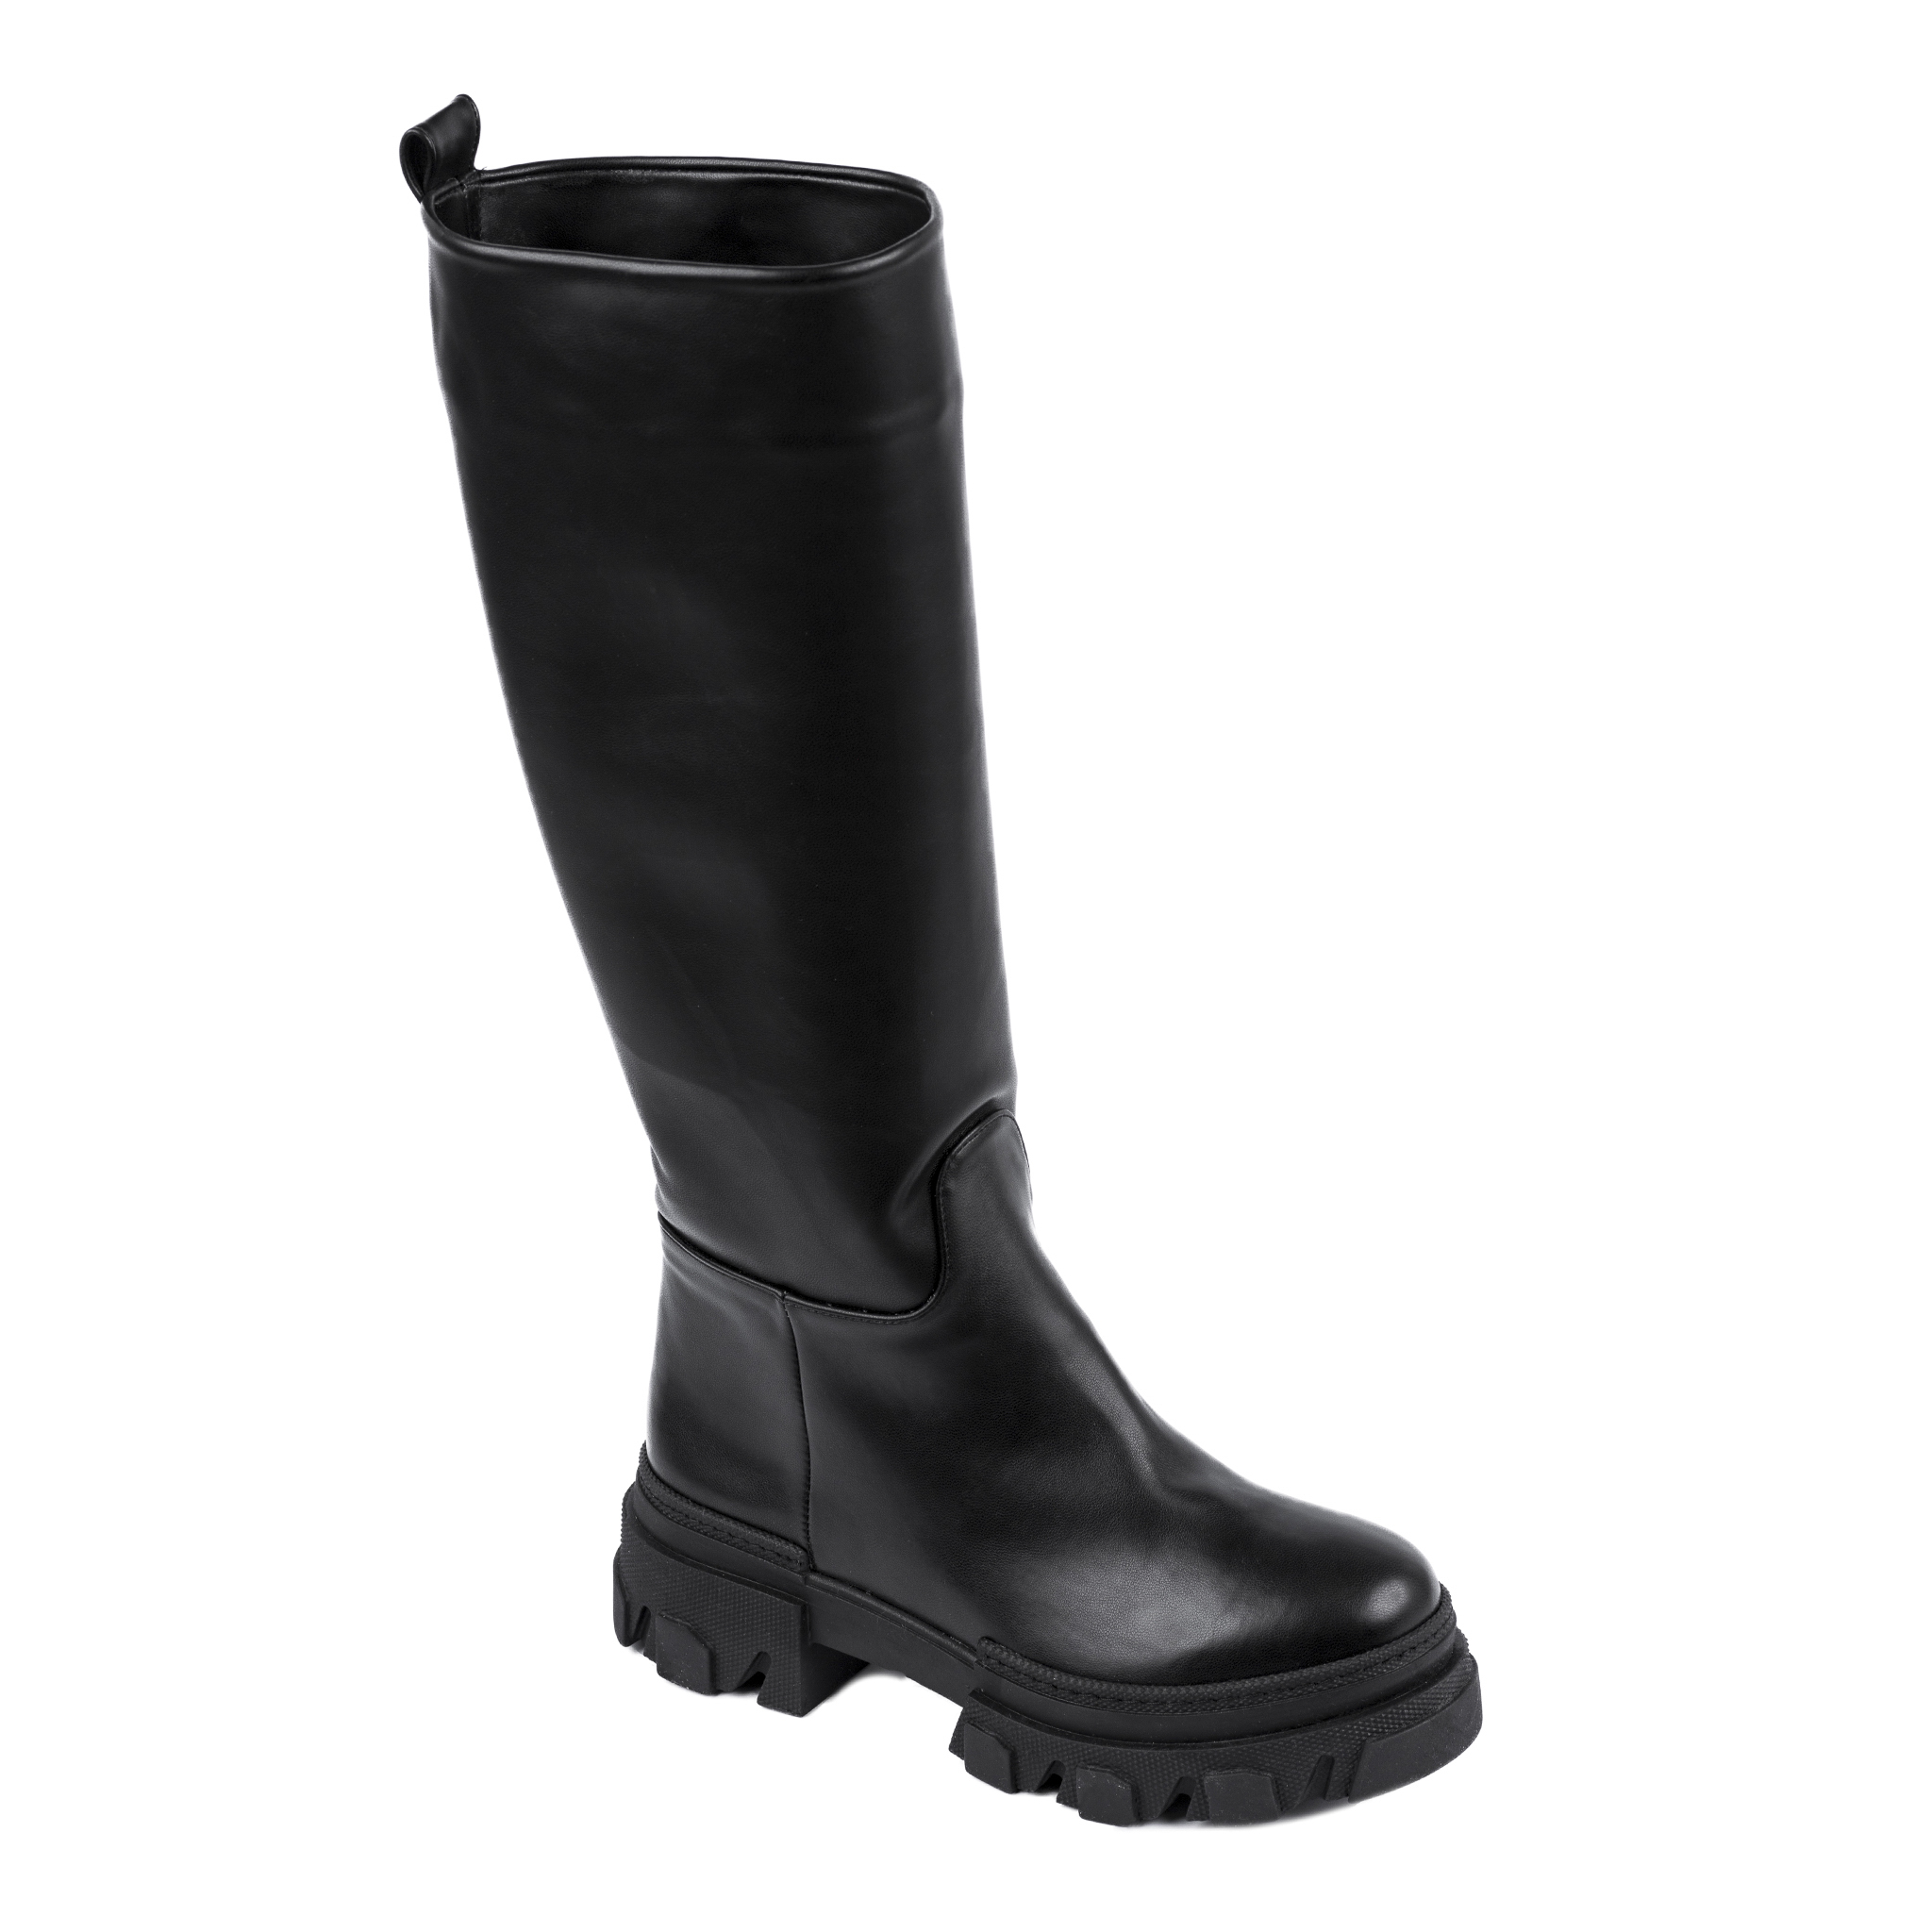 PULL ON HIGH SOLE BOOTS - BLACK